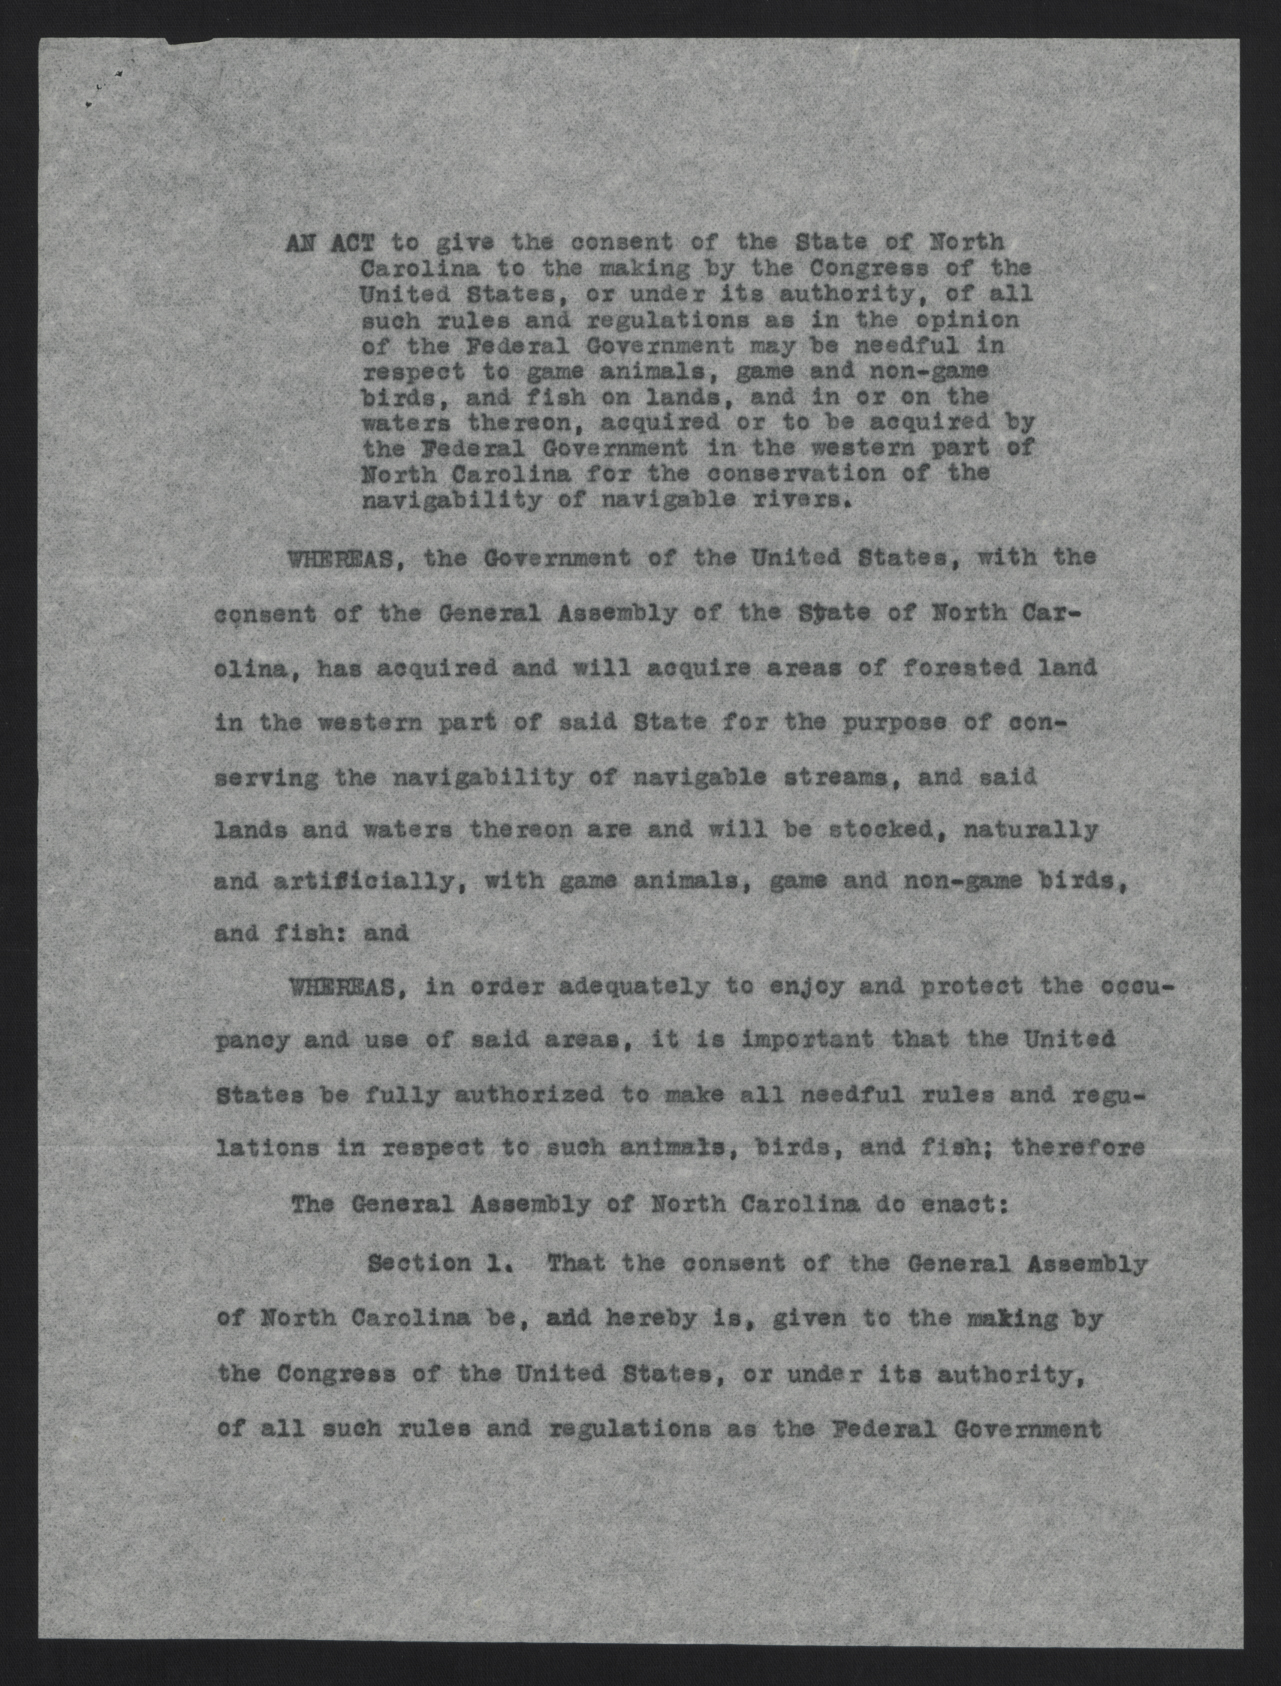 Proposed Act of the North Carolina General Assembly, circa January 1915, page 1